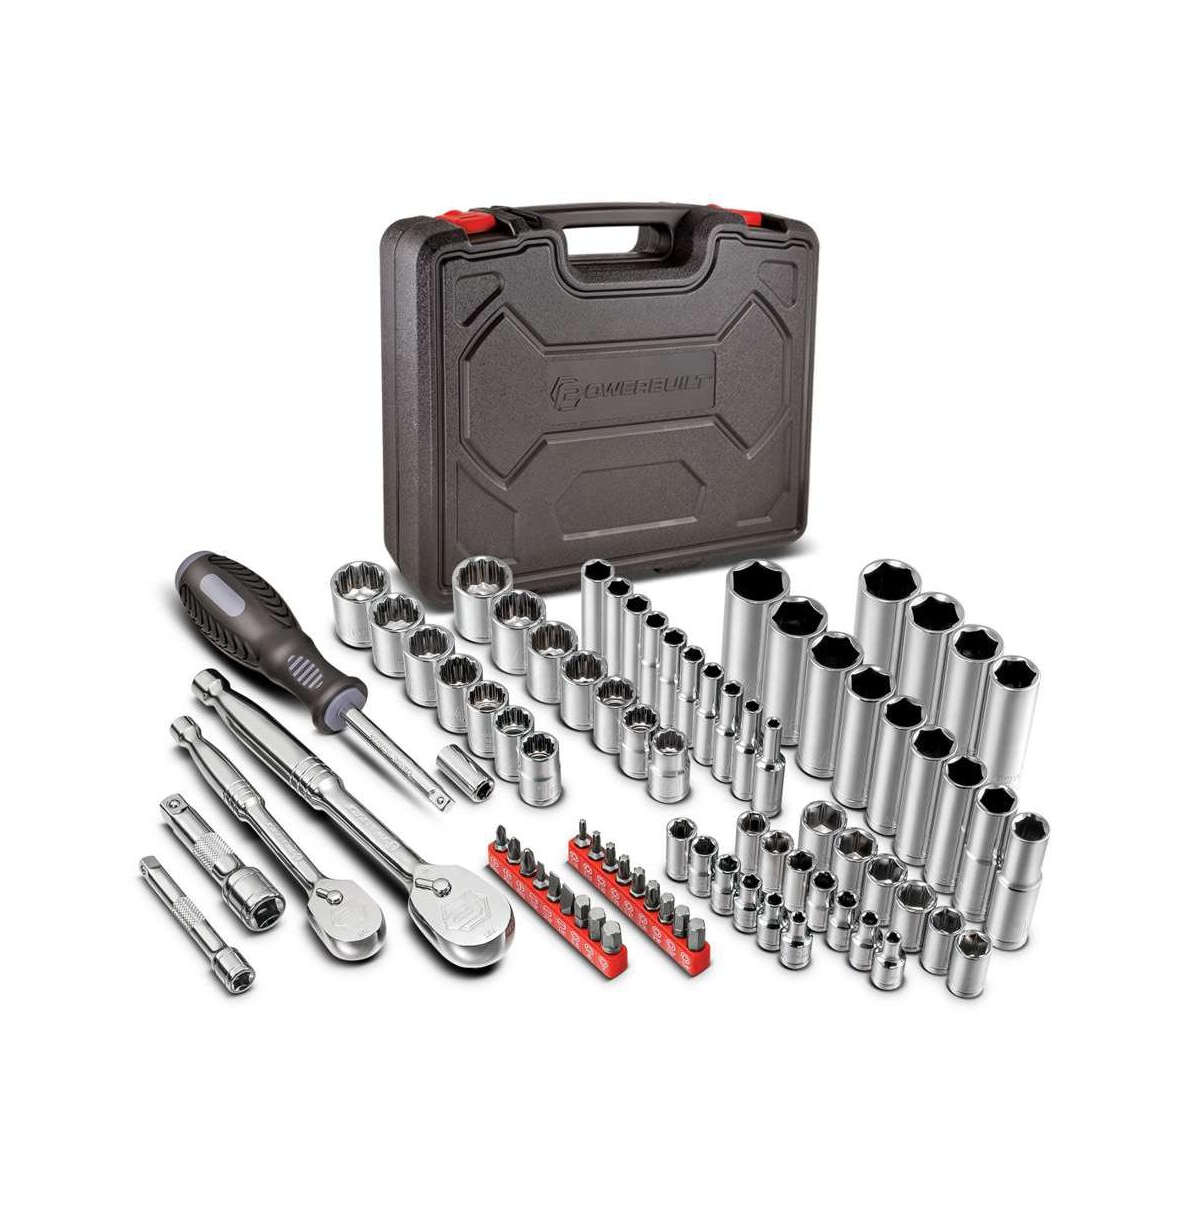 80 Piece Tool Set with Sockets, Ratchets, and Accessories in Case - Silver